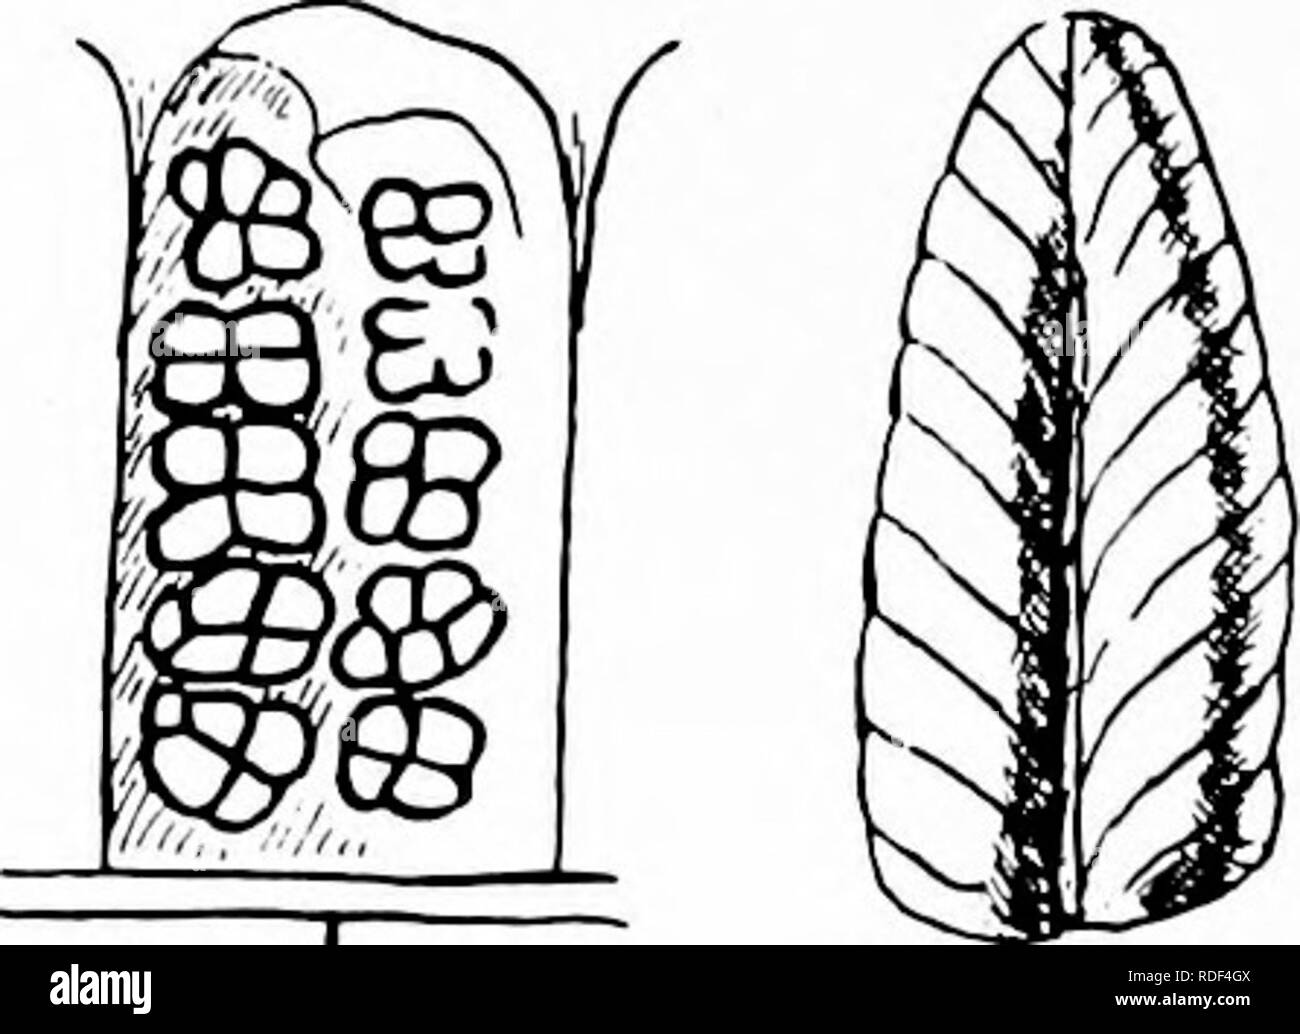 . Fossil plants : for students of botany and geology . Paleobotany. I I K FiQ. 291. A, B. Ptychocarpus unita. C, D. Asterotheca Sternhergii. E. Danaeites sarepontanus. F. Hawlea Miltoni. G. Hawlea pulcherrima. H—K. Scolecopteris elegans. (A, B, after Renault; C—G, after Stur; H, I, after Strasburger; K, after Sterzel.) In habit and in the form of the pinnules this type is similar to Dactylotheca plumosa. Haiulea. Stnr^ retains this generic name for sori in which the ' See Chap, xxvii. 2 Stur (85) A. p. 106.. Please note that these images are extracted from scanned page images that may have bee Stock Photo